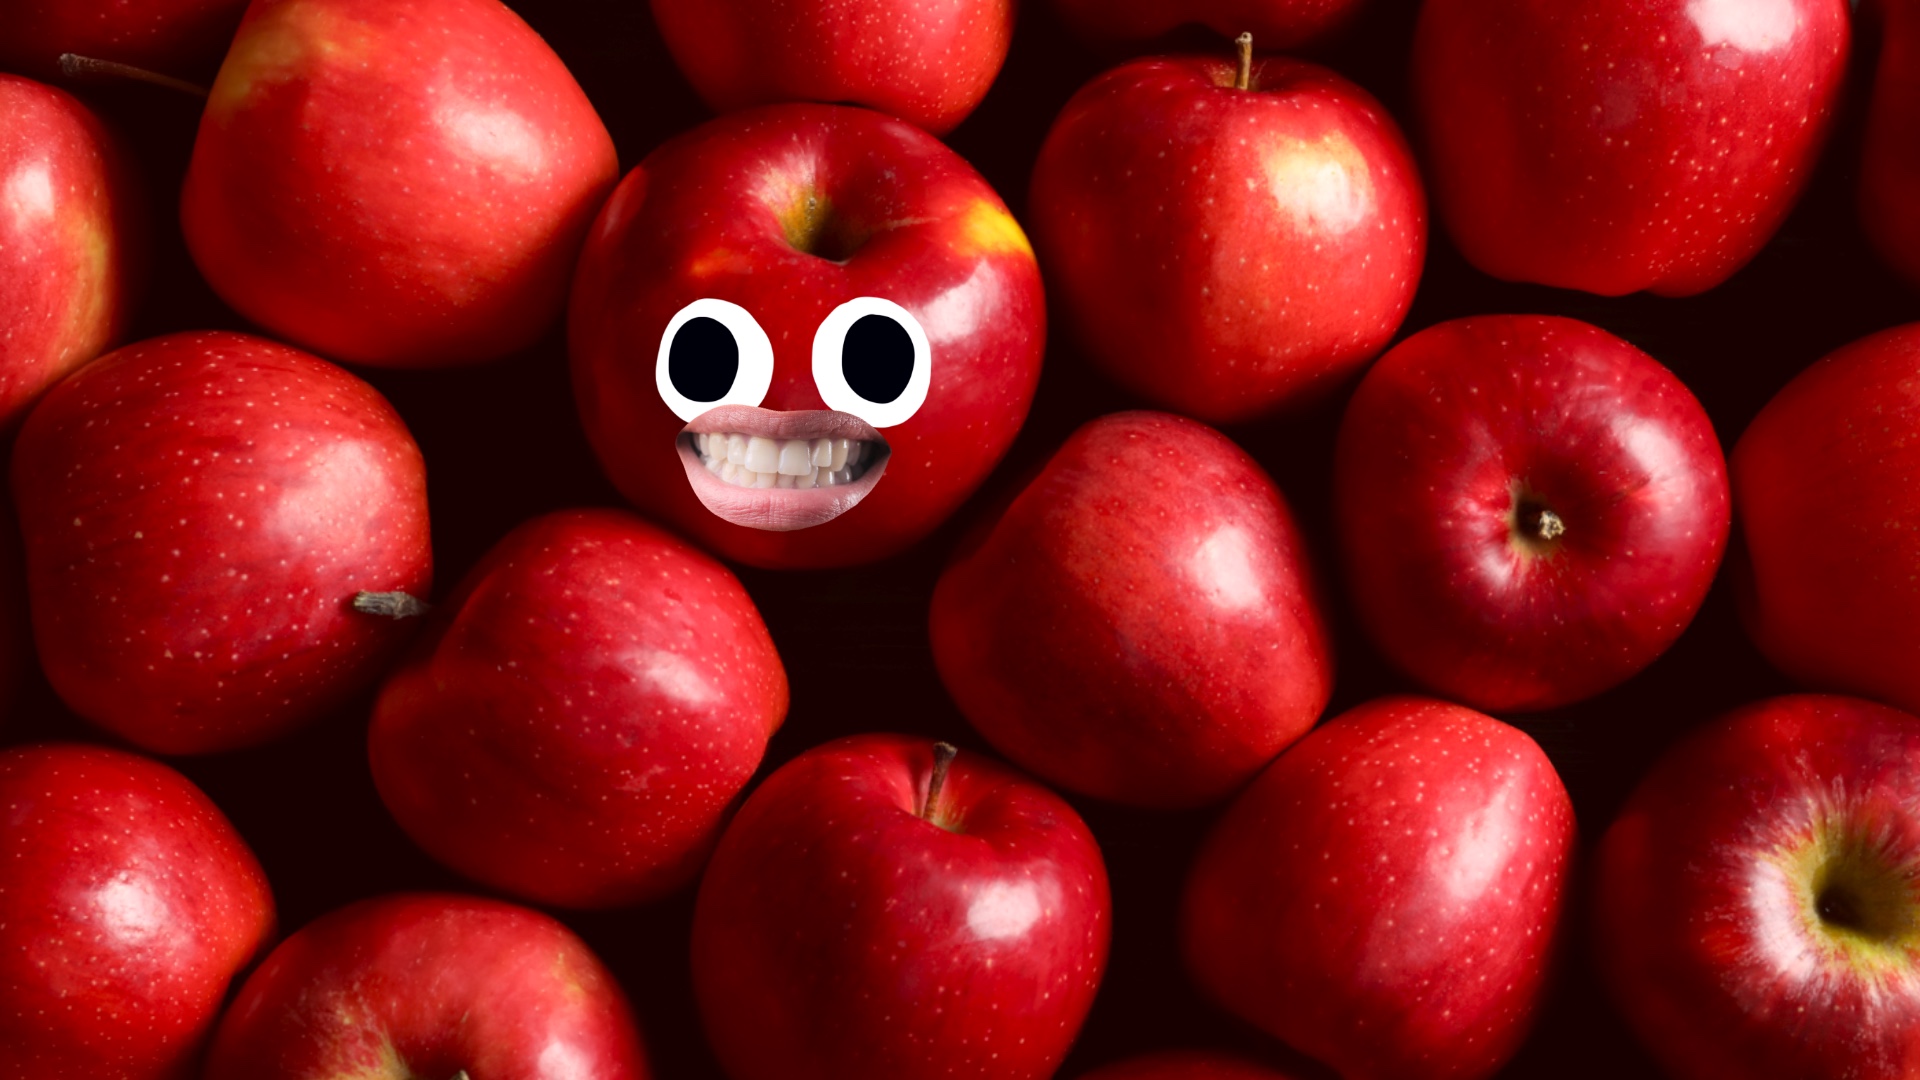 A bunch of shiny red apples